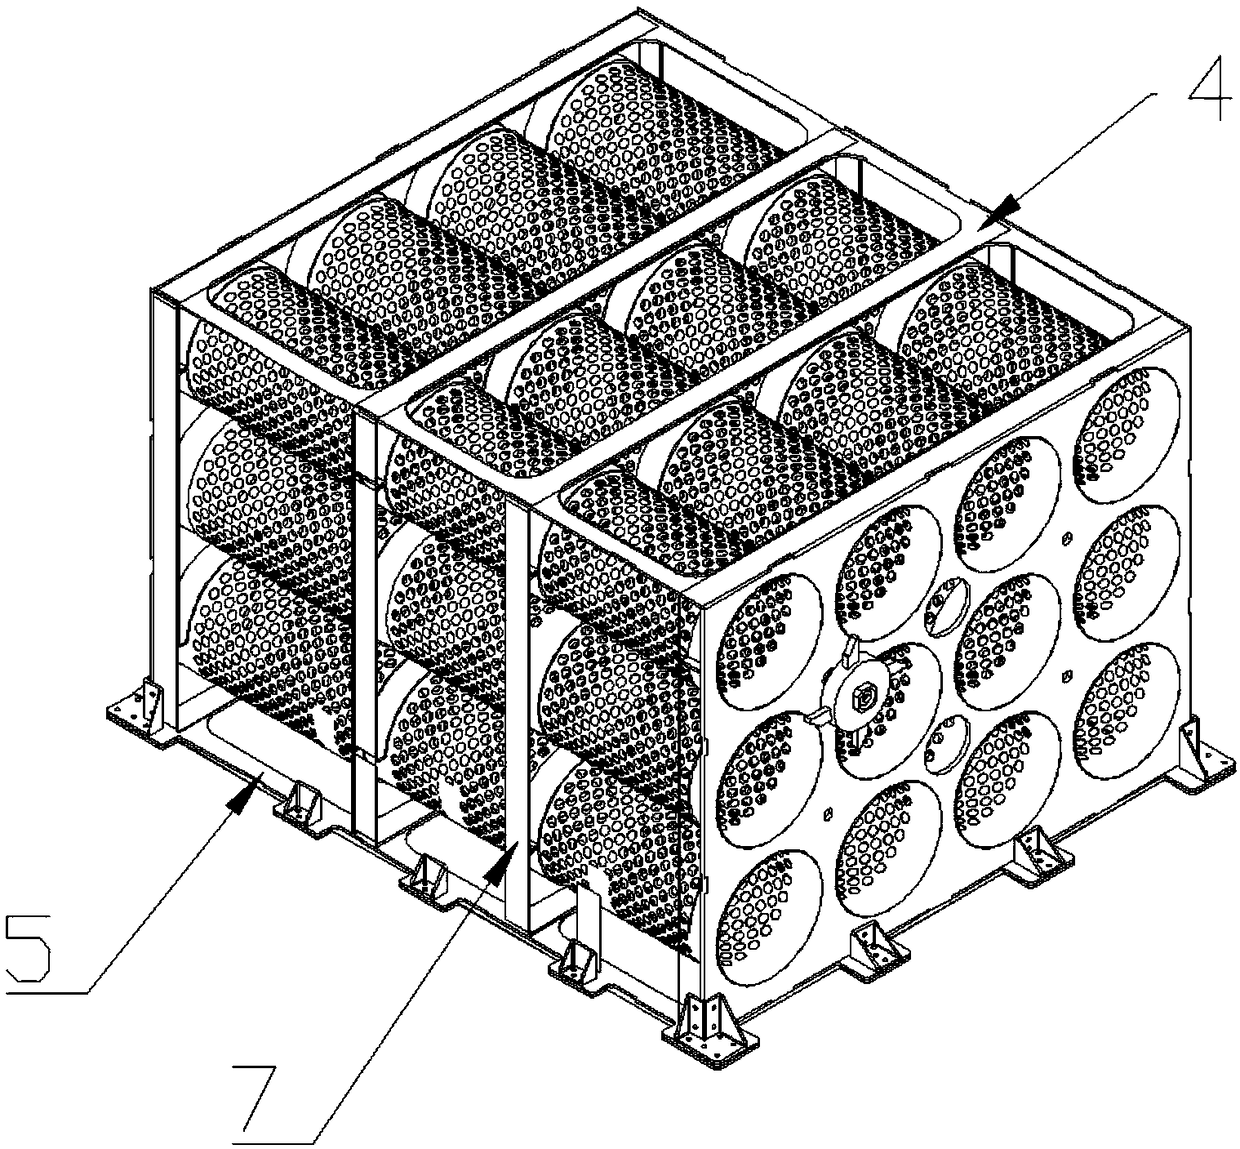 Composite material projectile body storage box